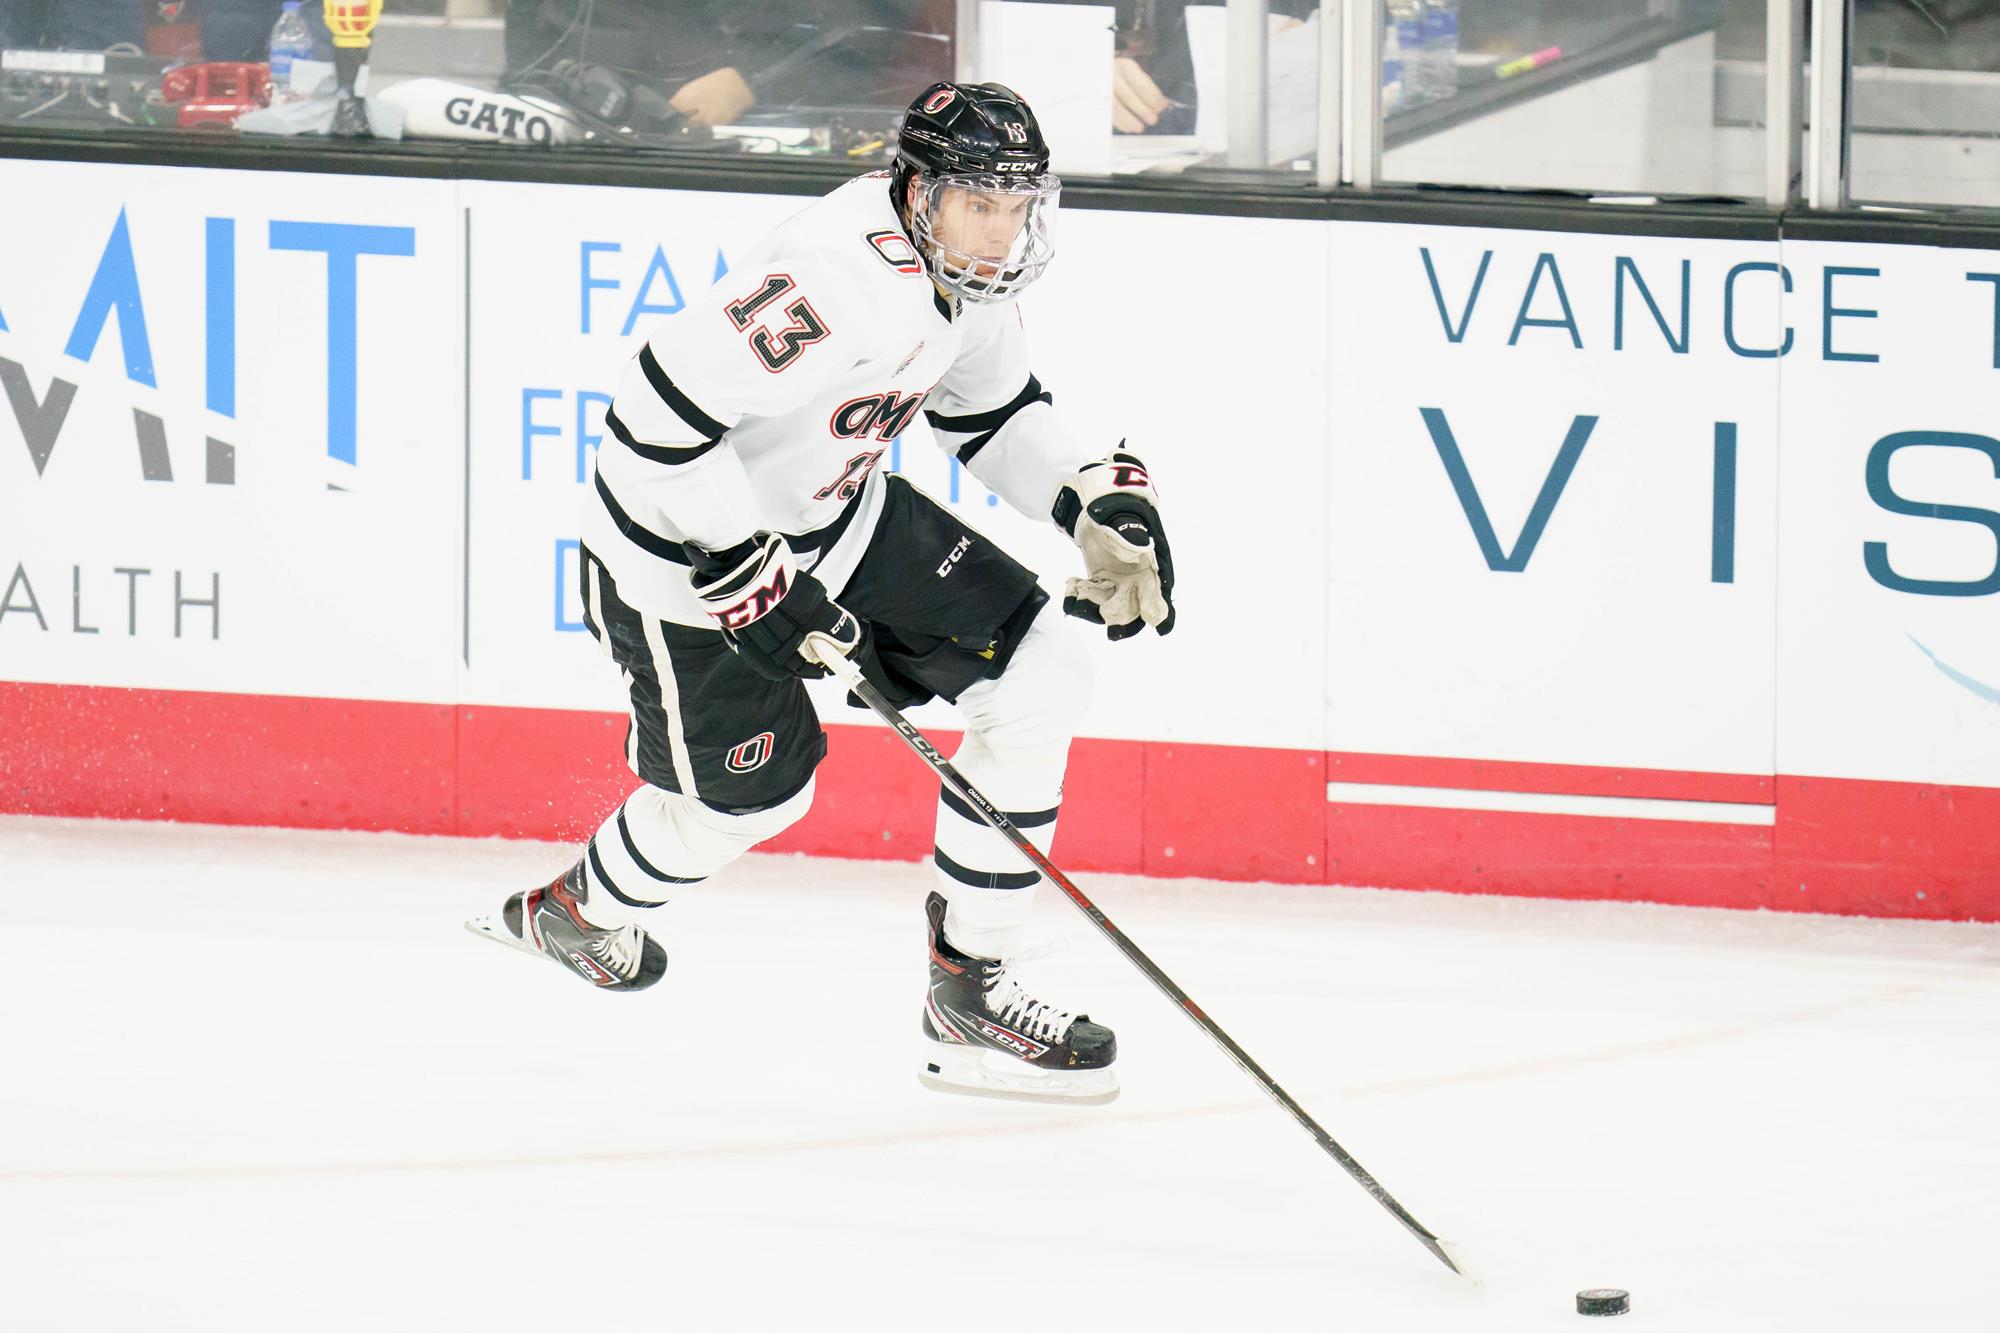 Chayse Primeau Played Four Seasons With The University of Omaha